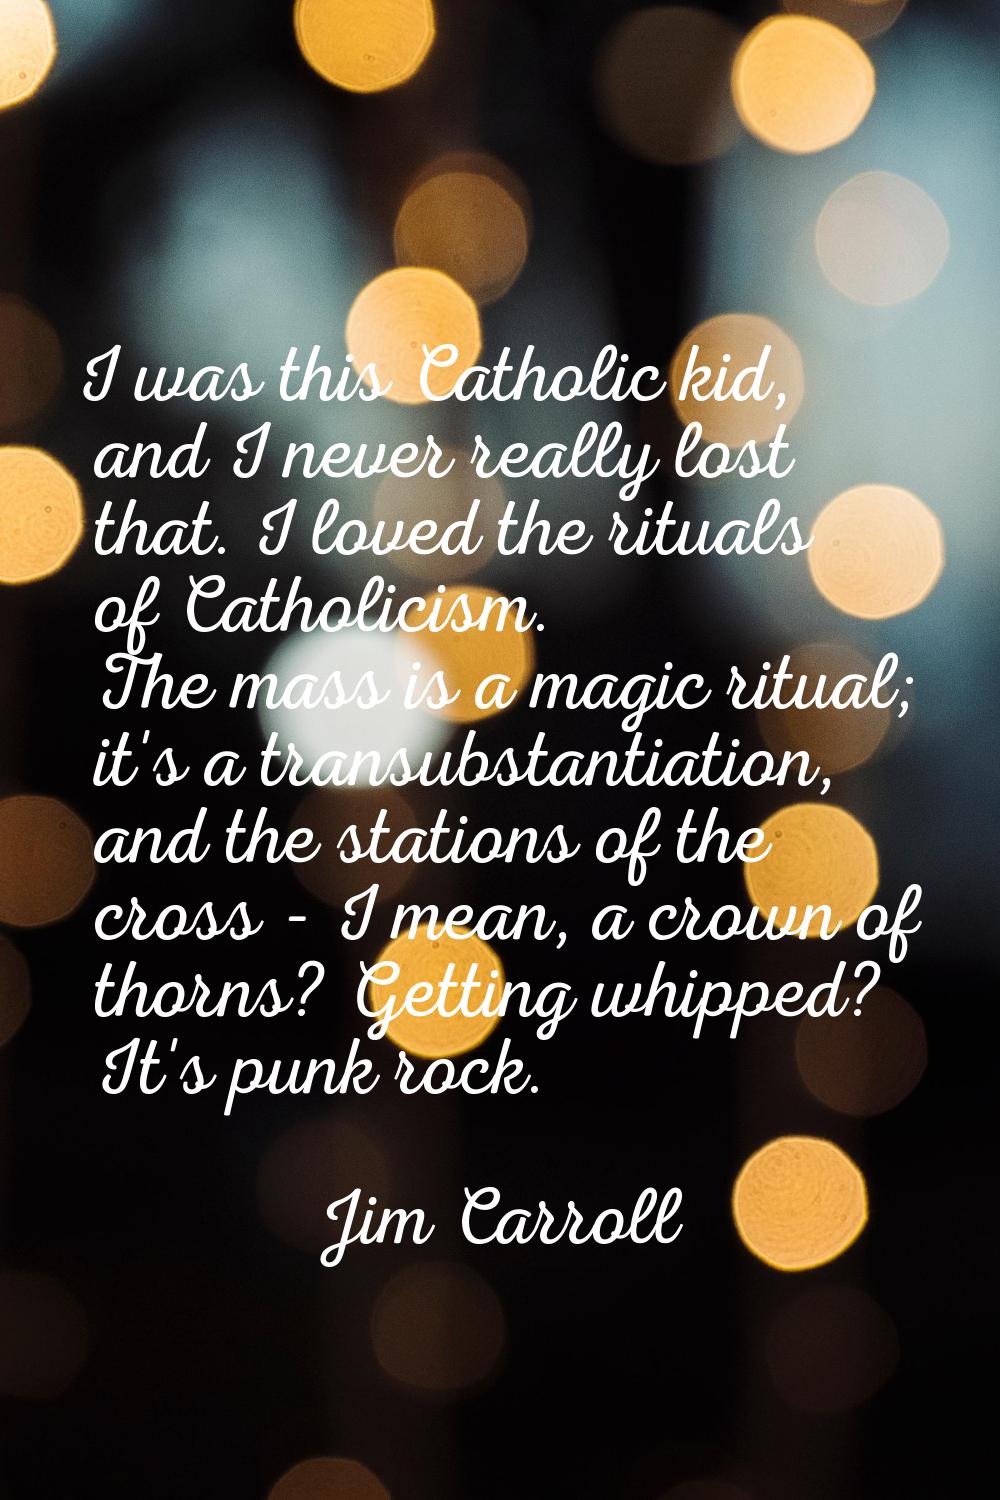 I was this Catholic kid, and I never really lost that. I loved the rituals of Catholicism. The mass